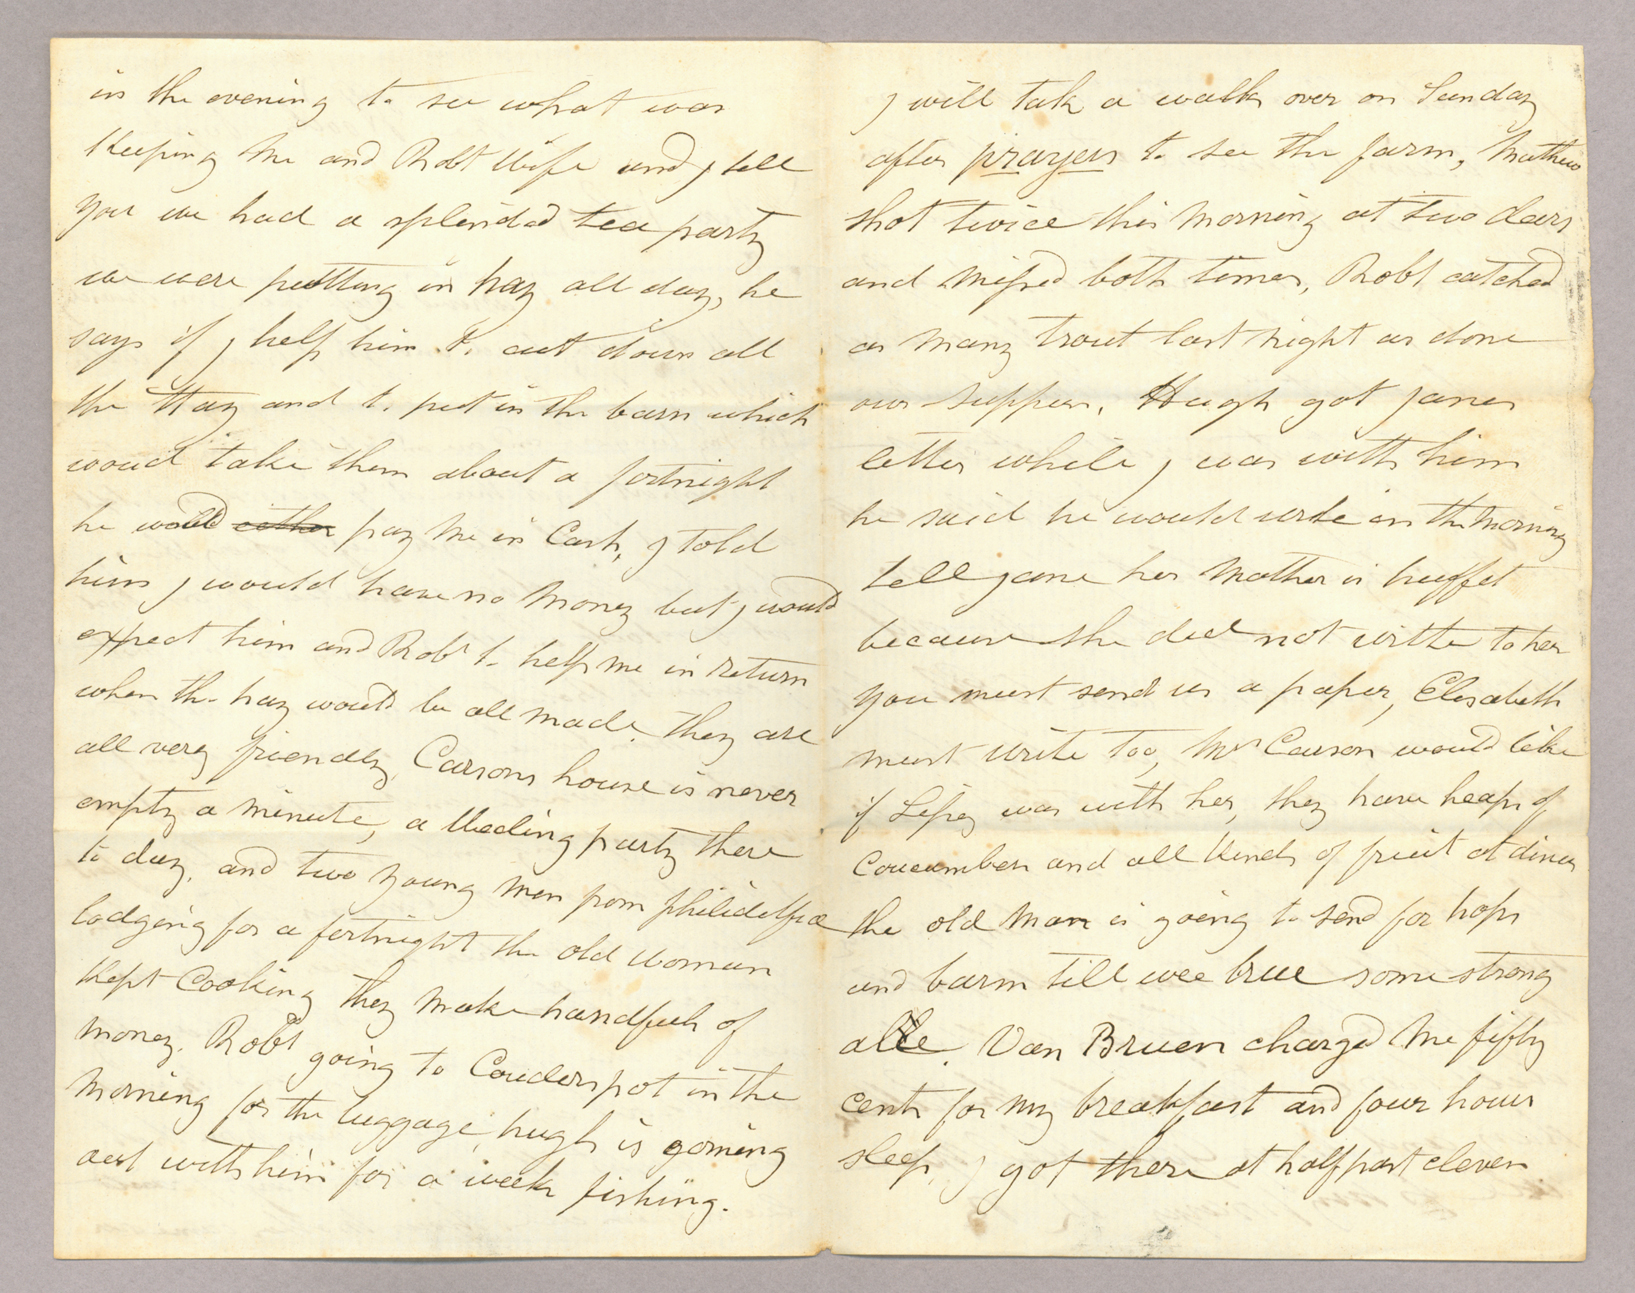 Letter. R[obert] B[rownlee], Potter County, Pennsylvania, to "Dear Johny" [John E. Brownlee], n. p., Pages 2-3